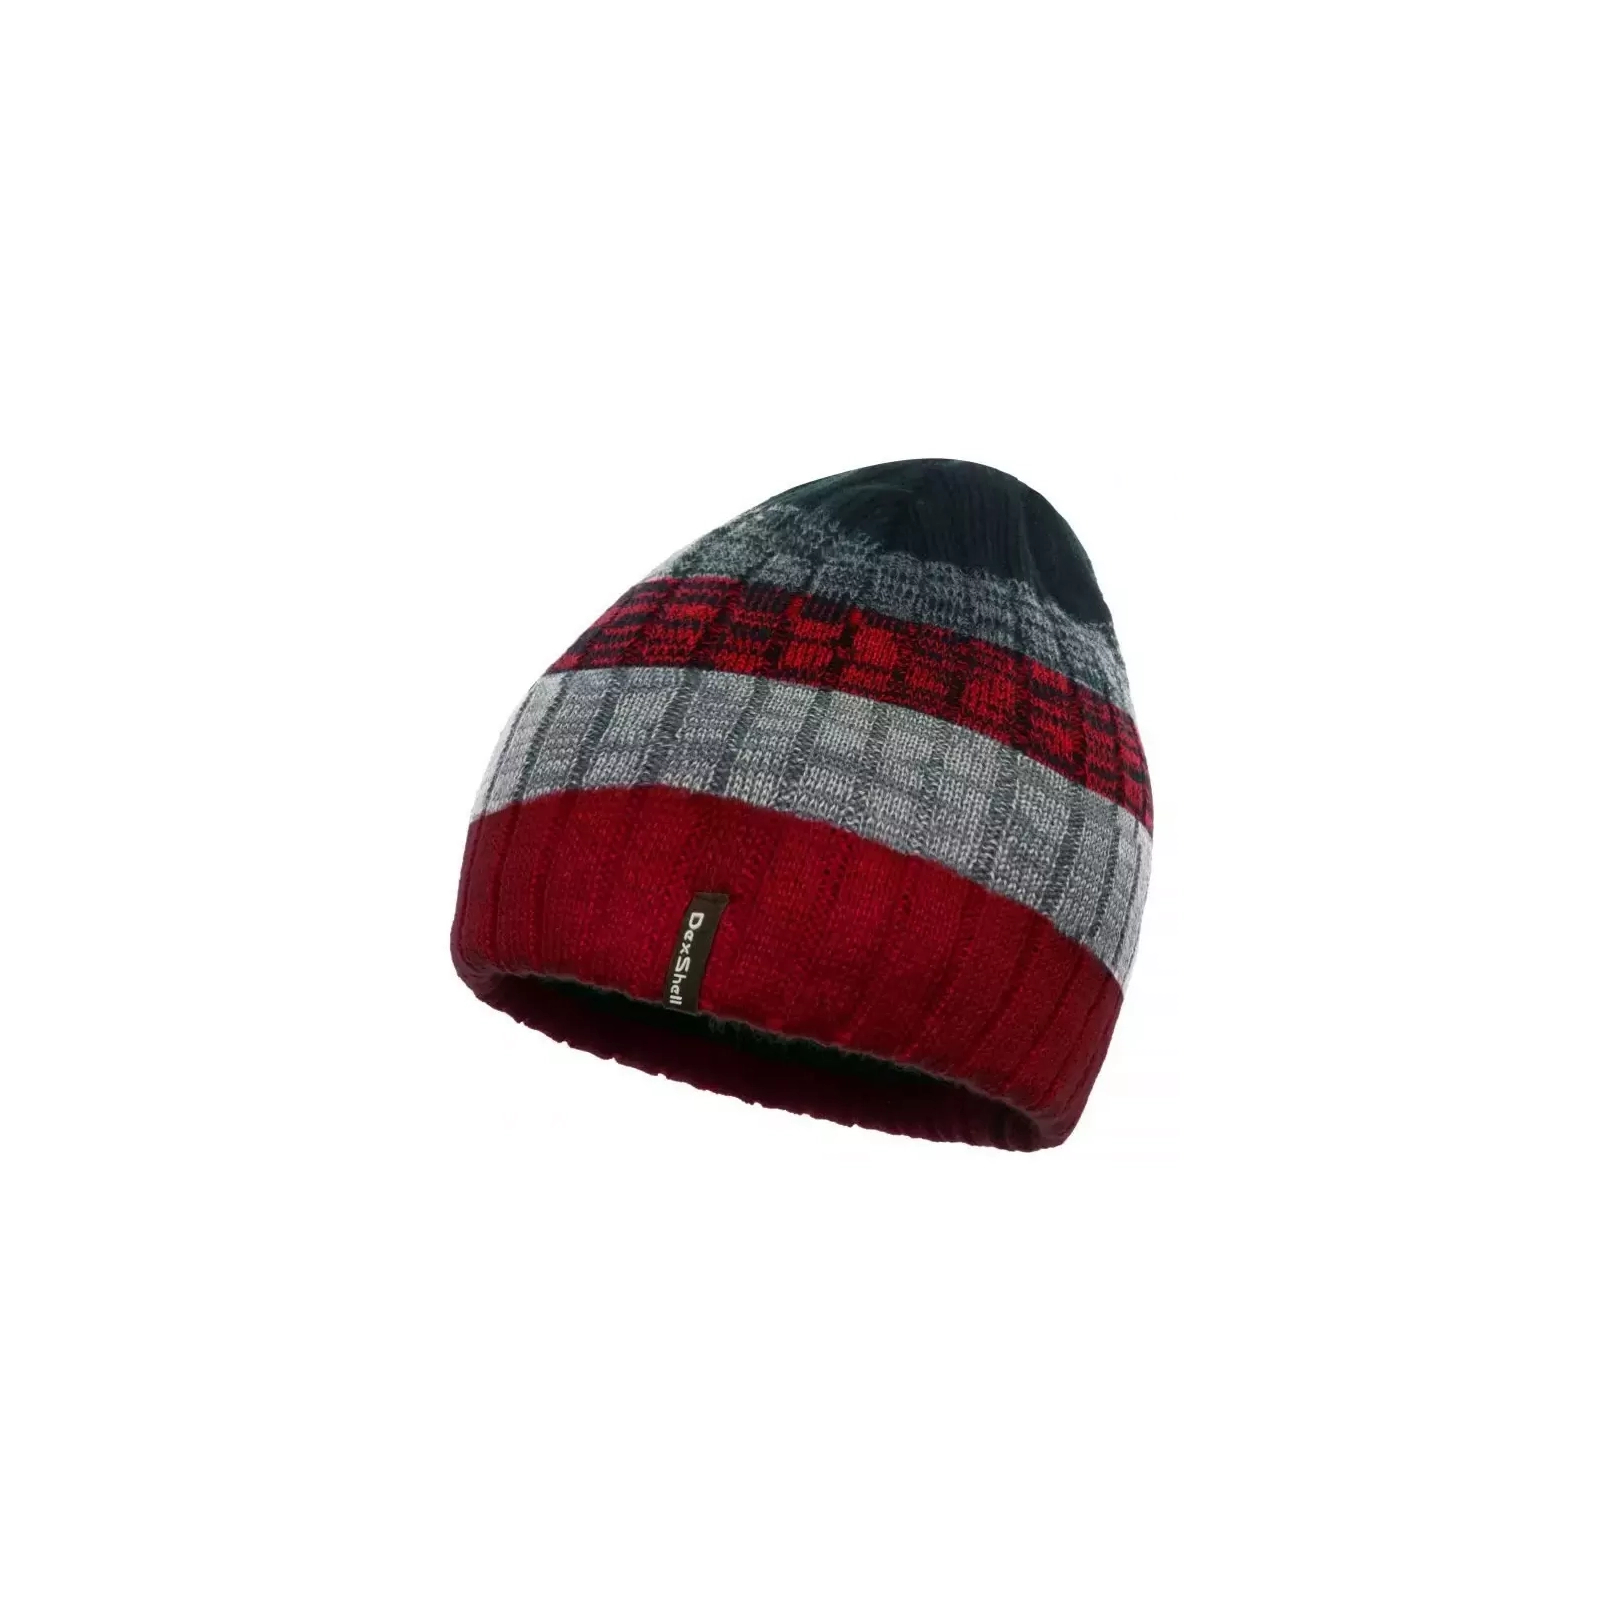 Водонепроницаемая шапка Dexshell Beanie Gradient Red (DH332N-RED)